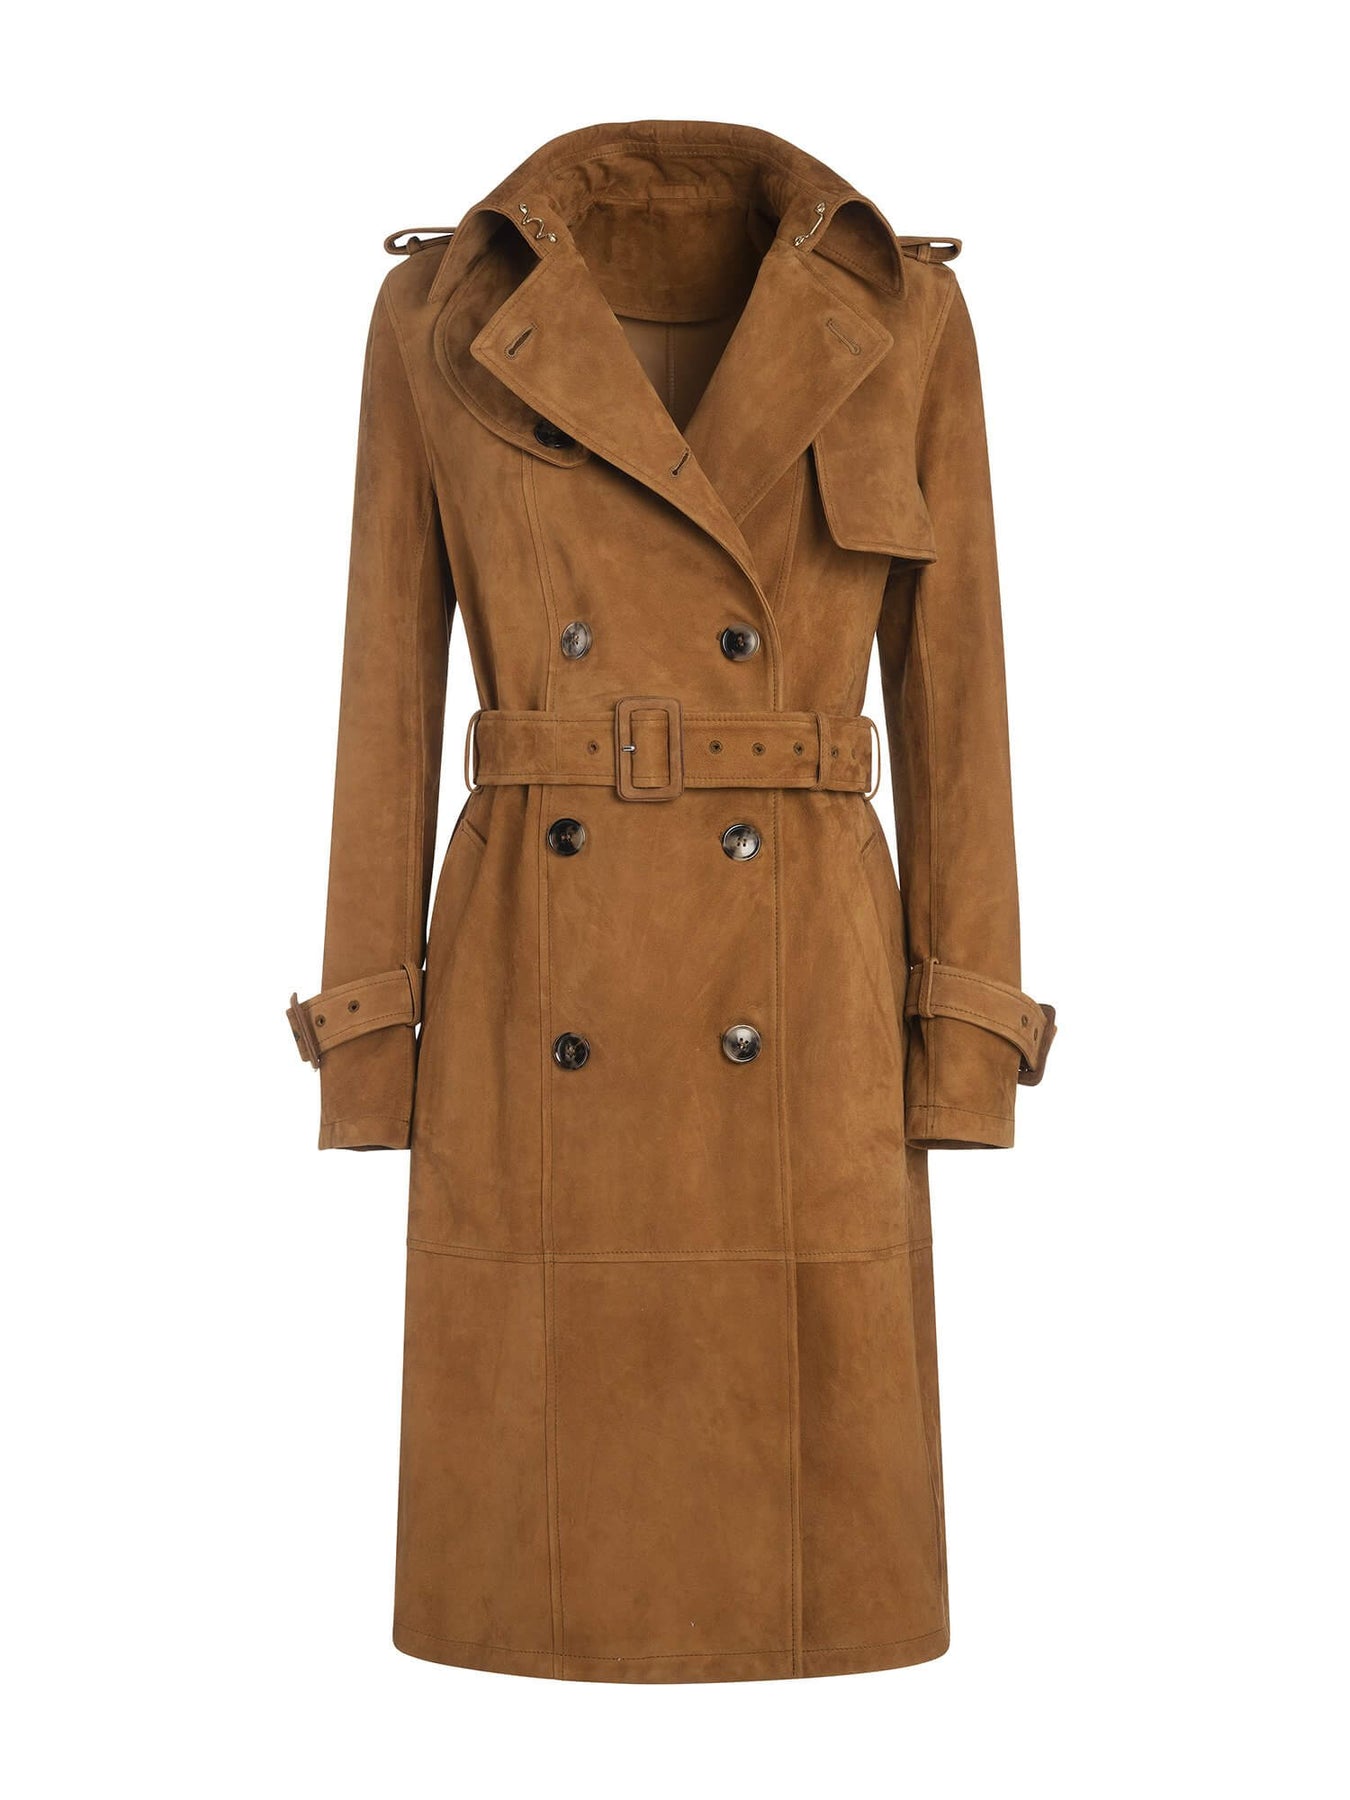 Beatrice Suede Leather Trench Coat | Tuscan Tailor